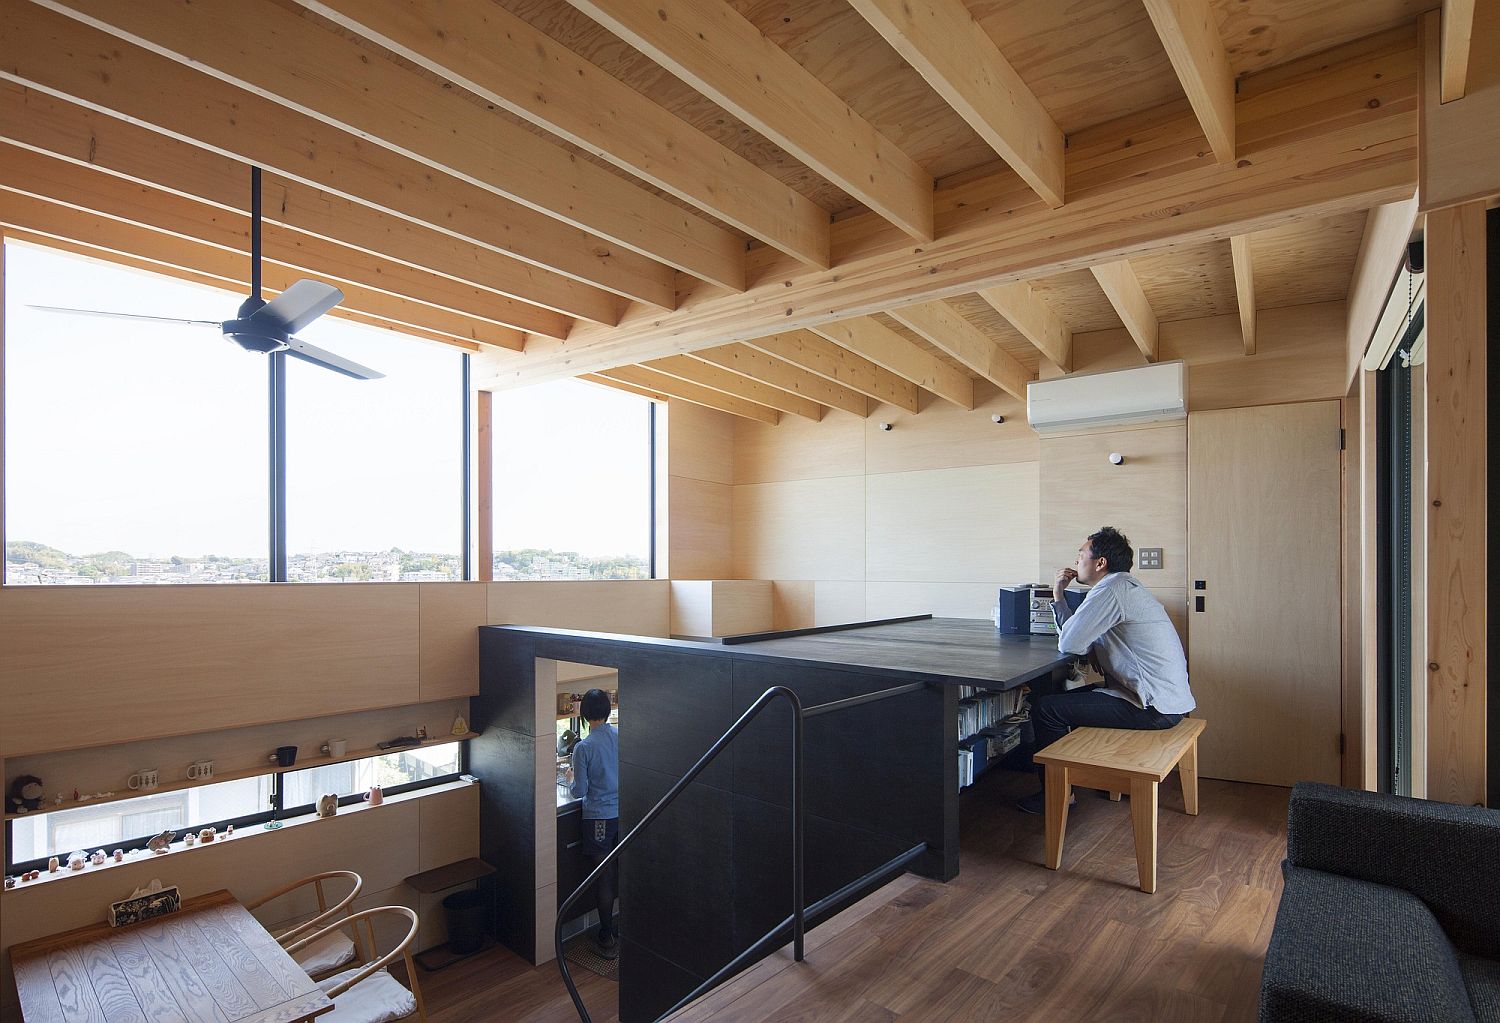 Multi-level interior of the Japanese home